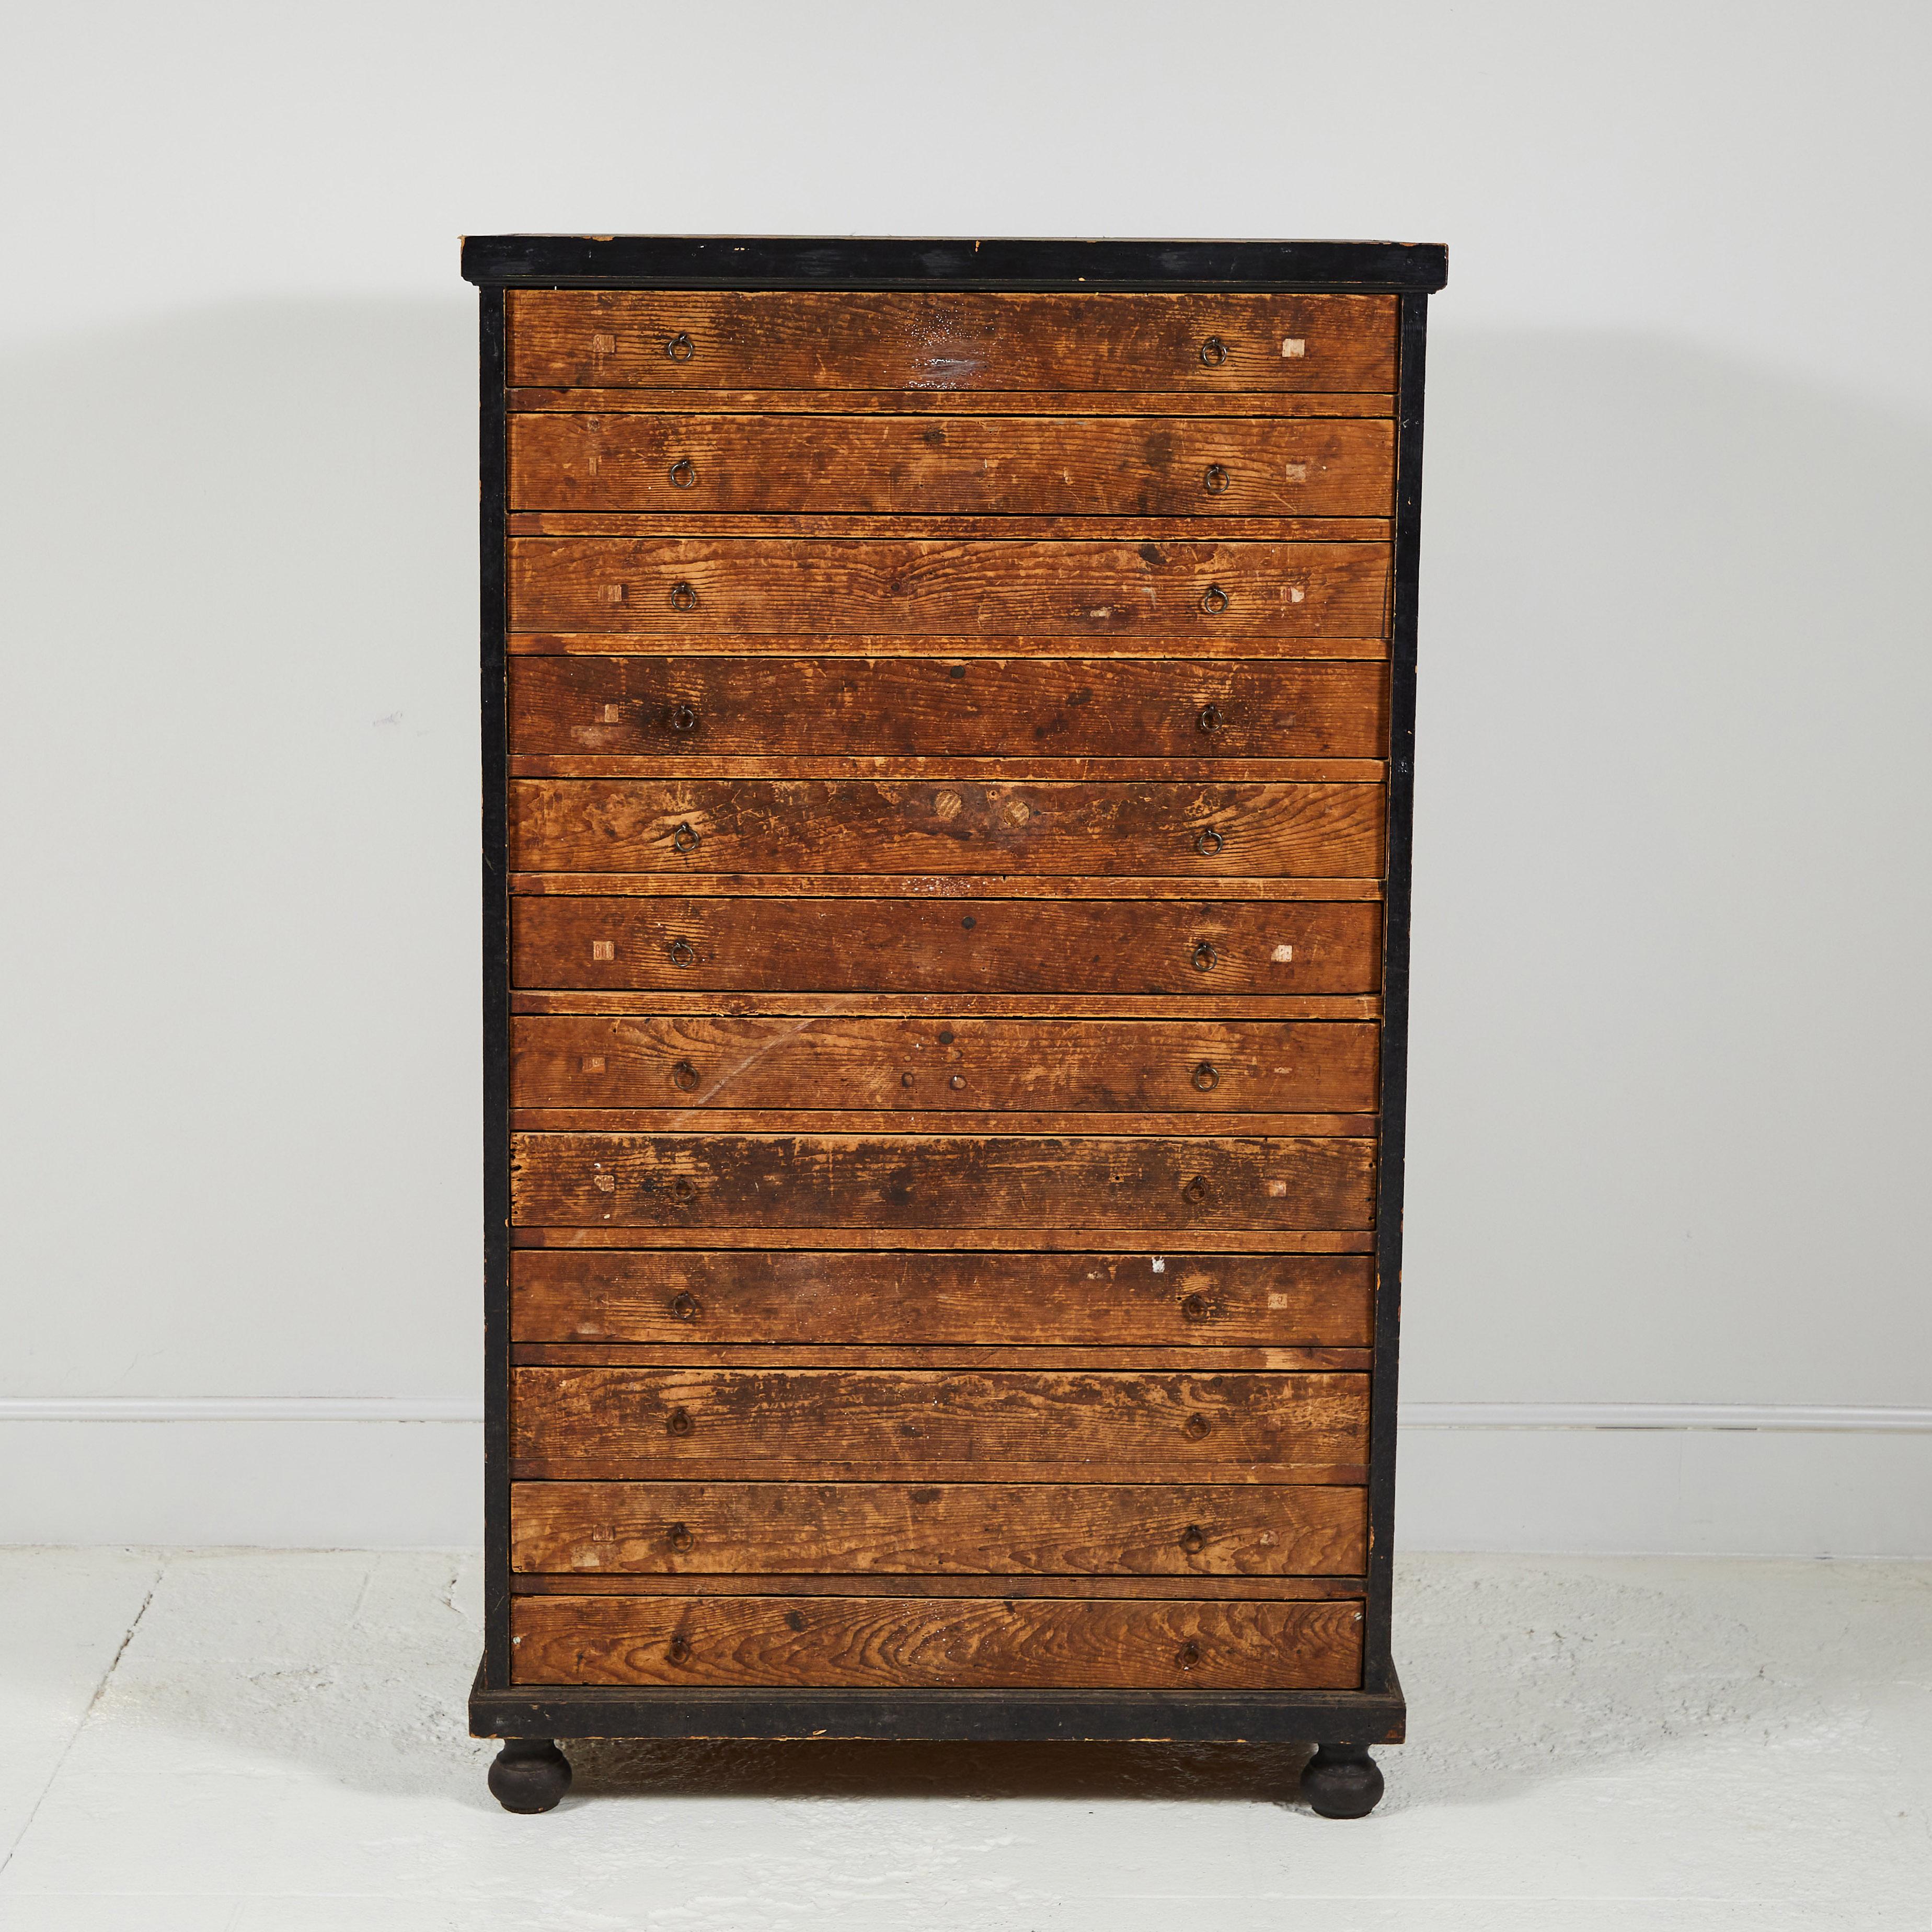 French Primitive tall chest of drawers, the body consists of a black painted frame with rustic wooden drawers. Each drawer is shallow and is the same size.
 
 